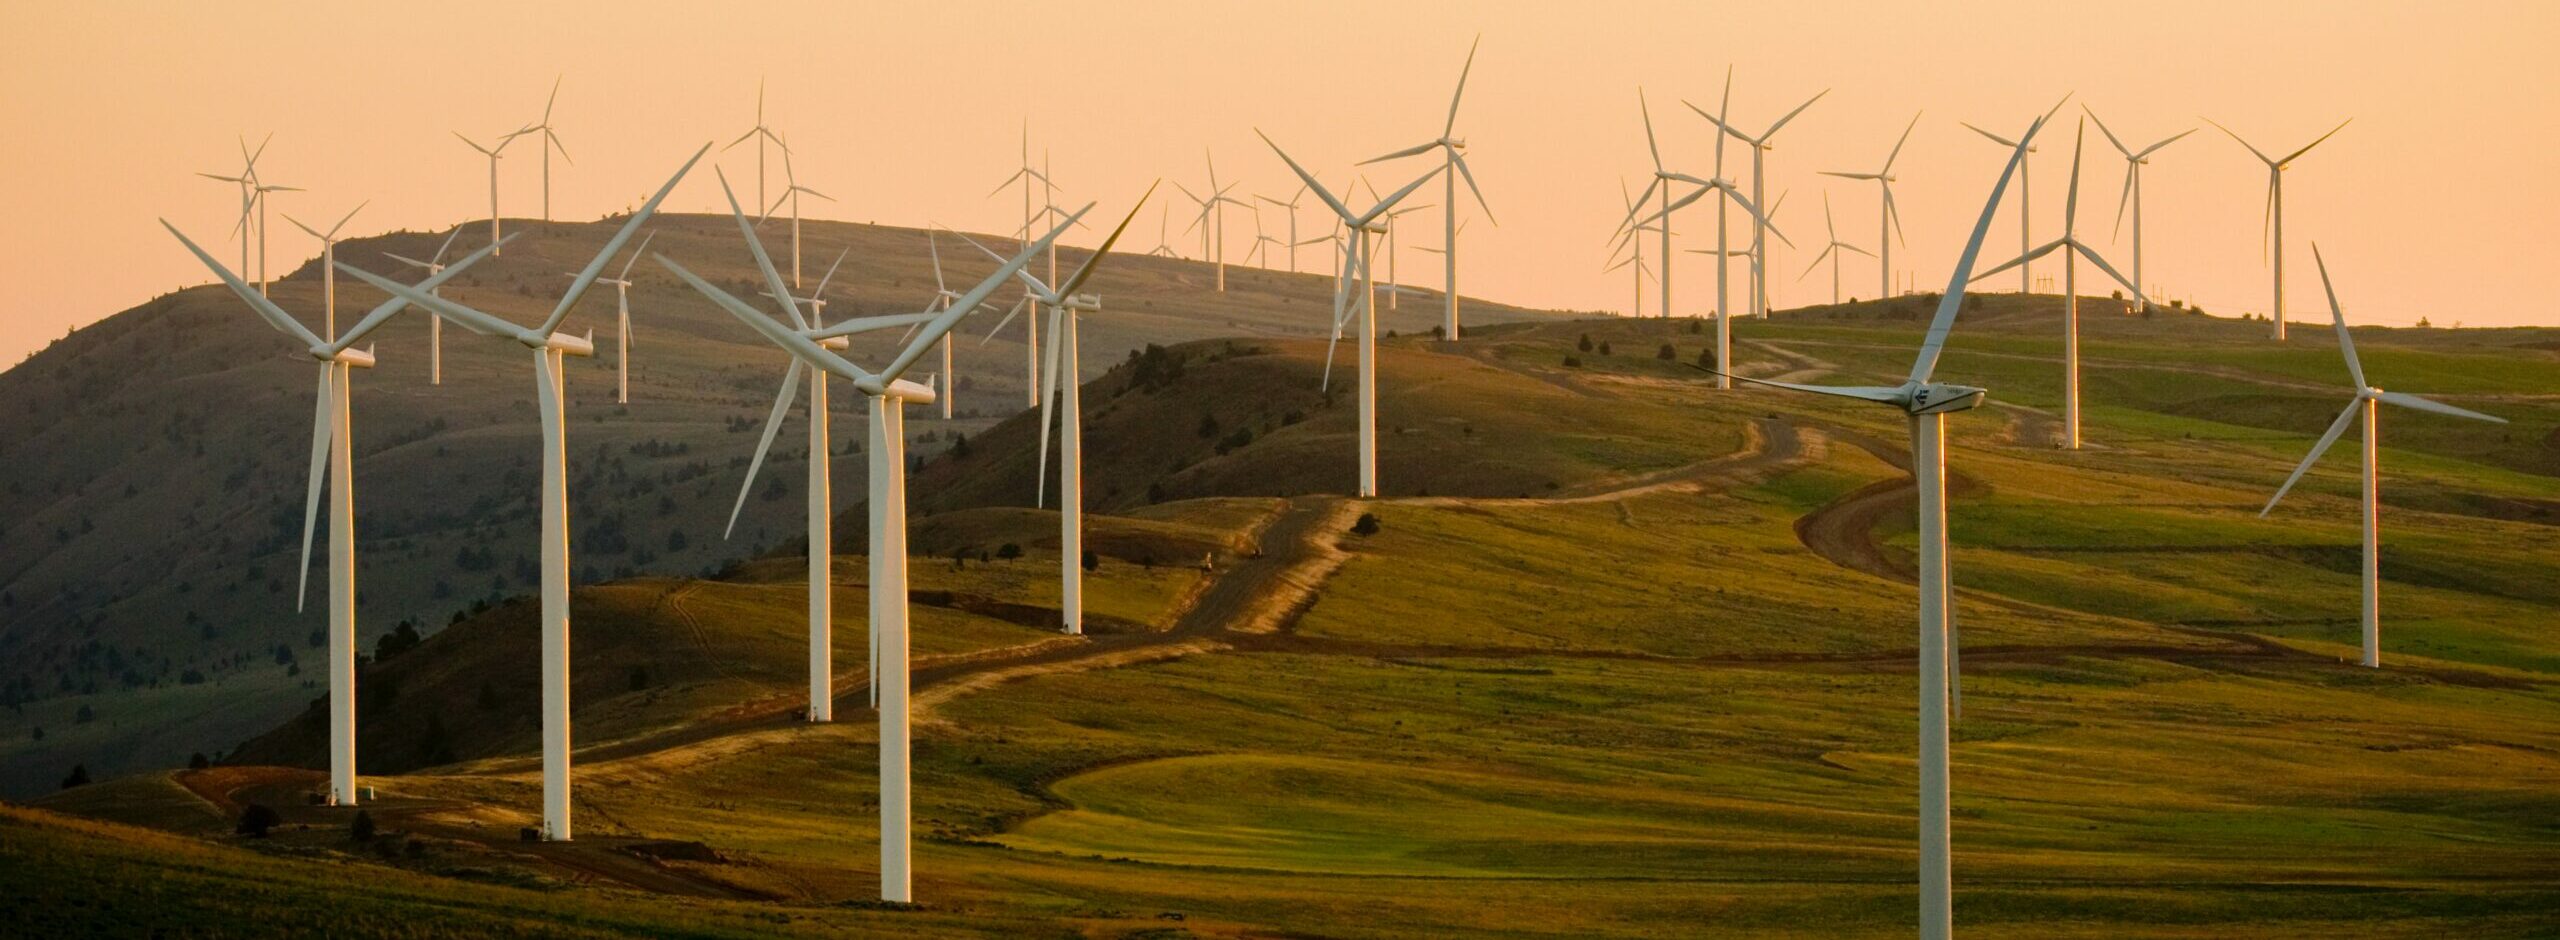 Wind energy developers from the United States